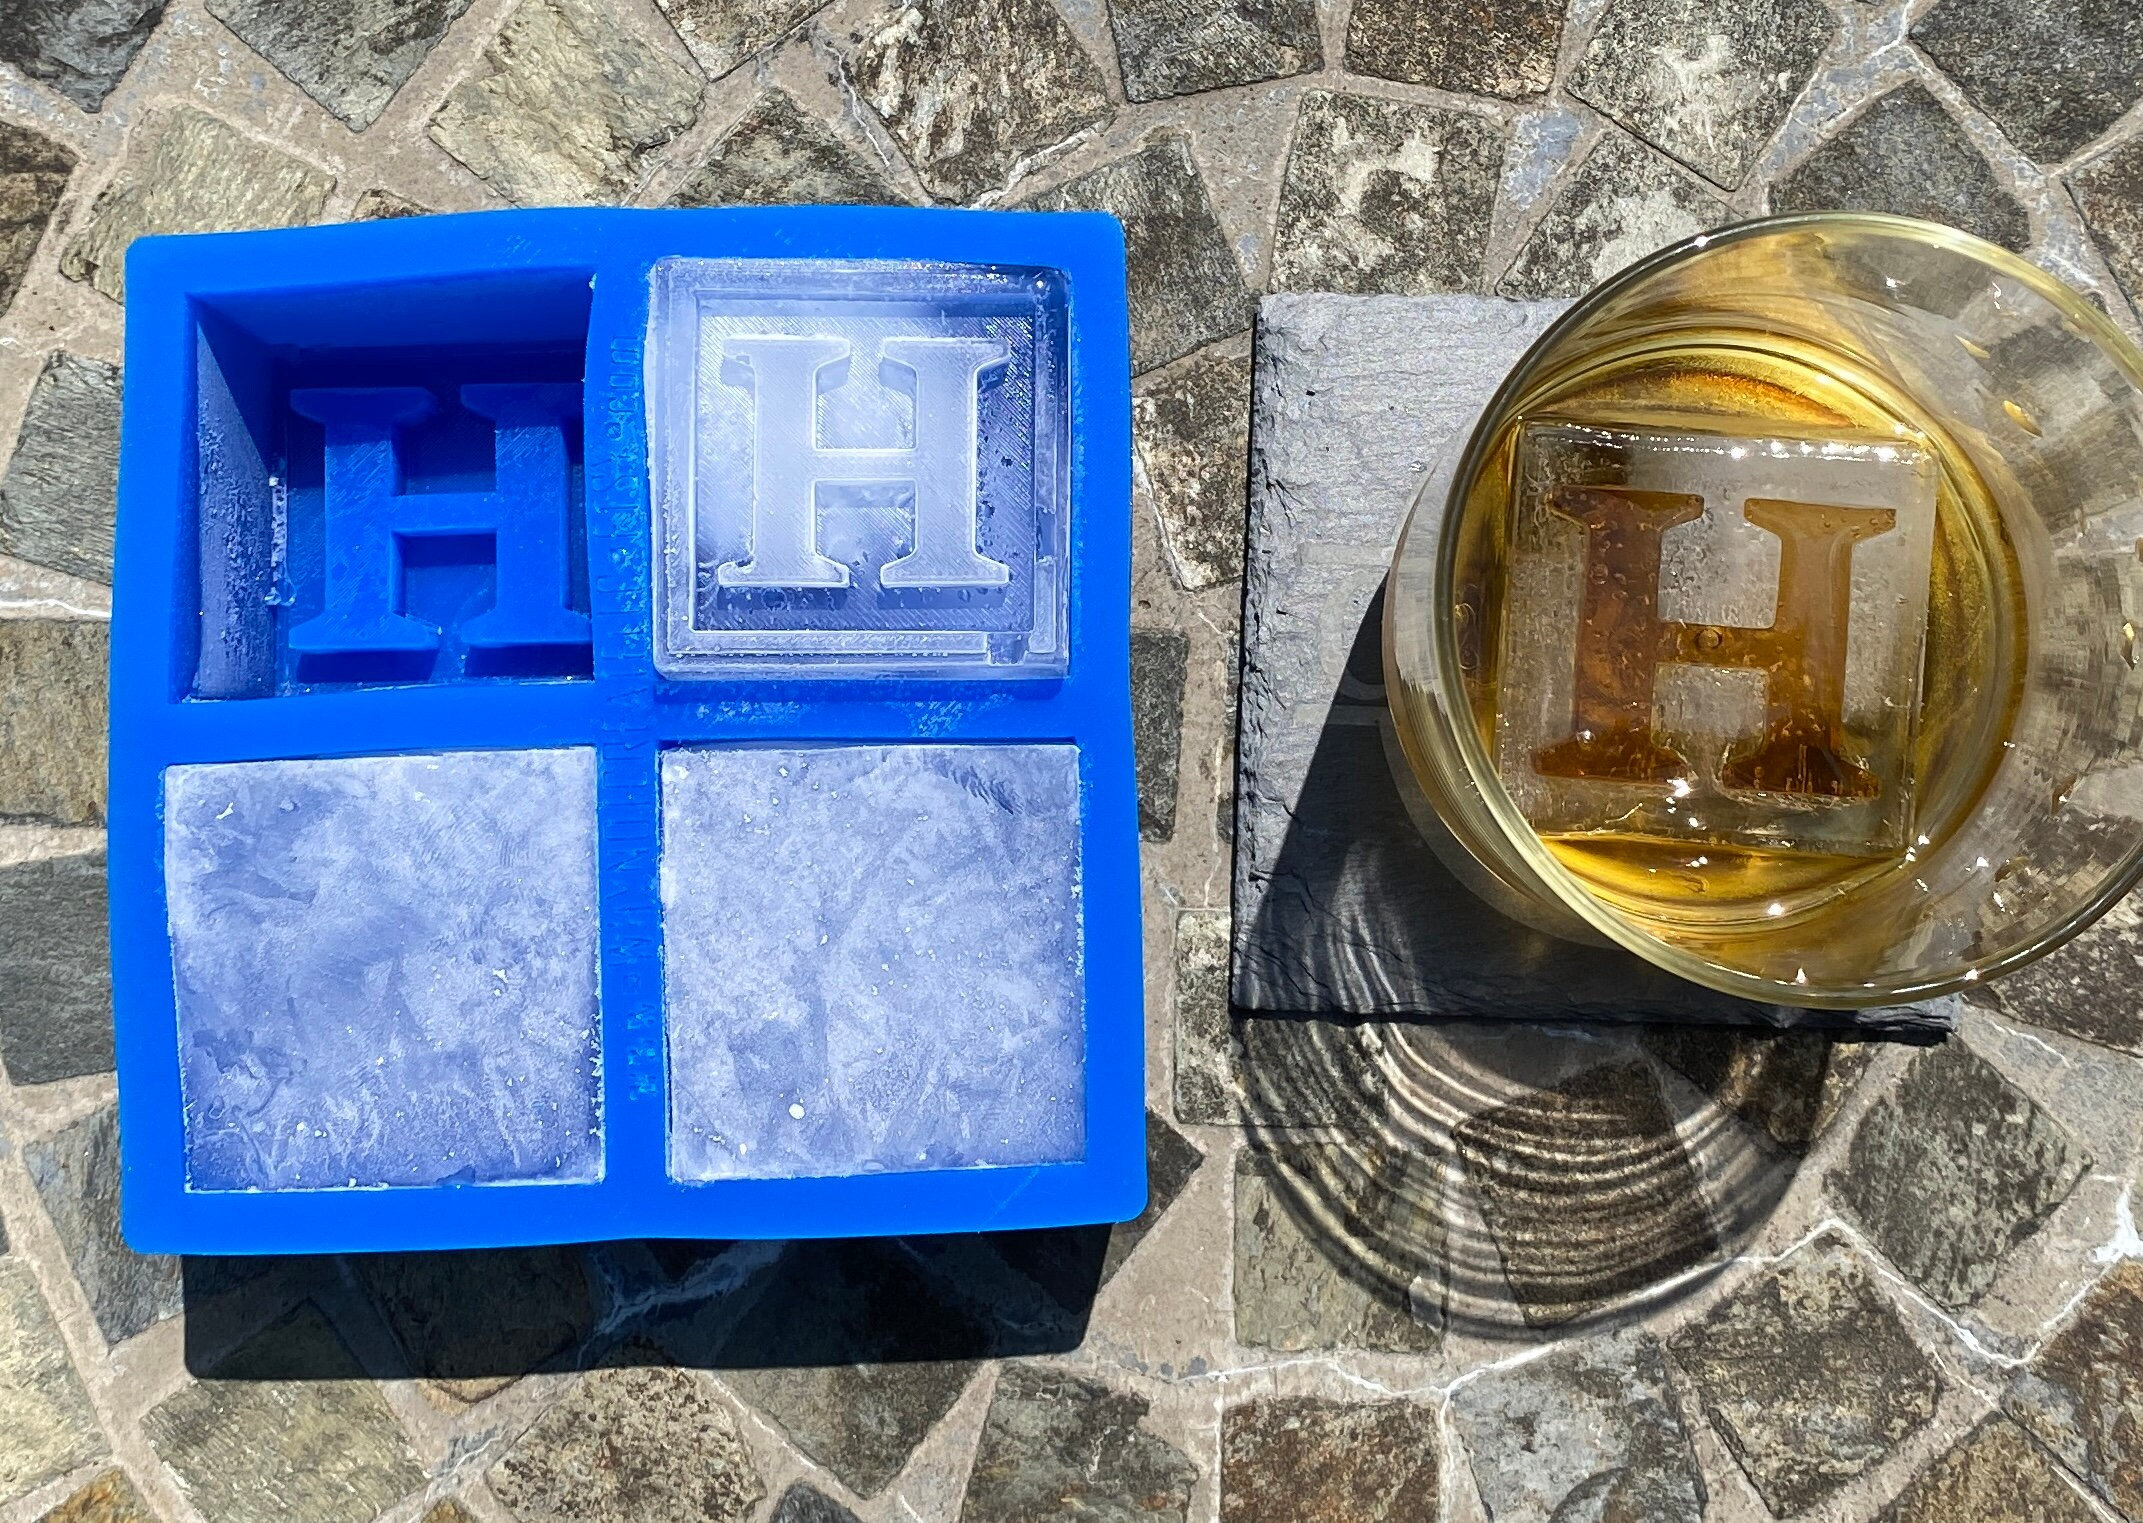 Custom Personalized Silicone Ice Cube Sphere Mold $4.38